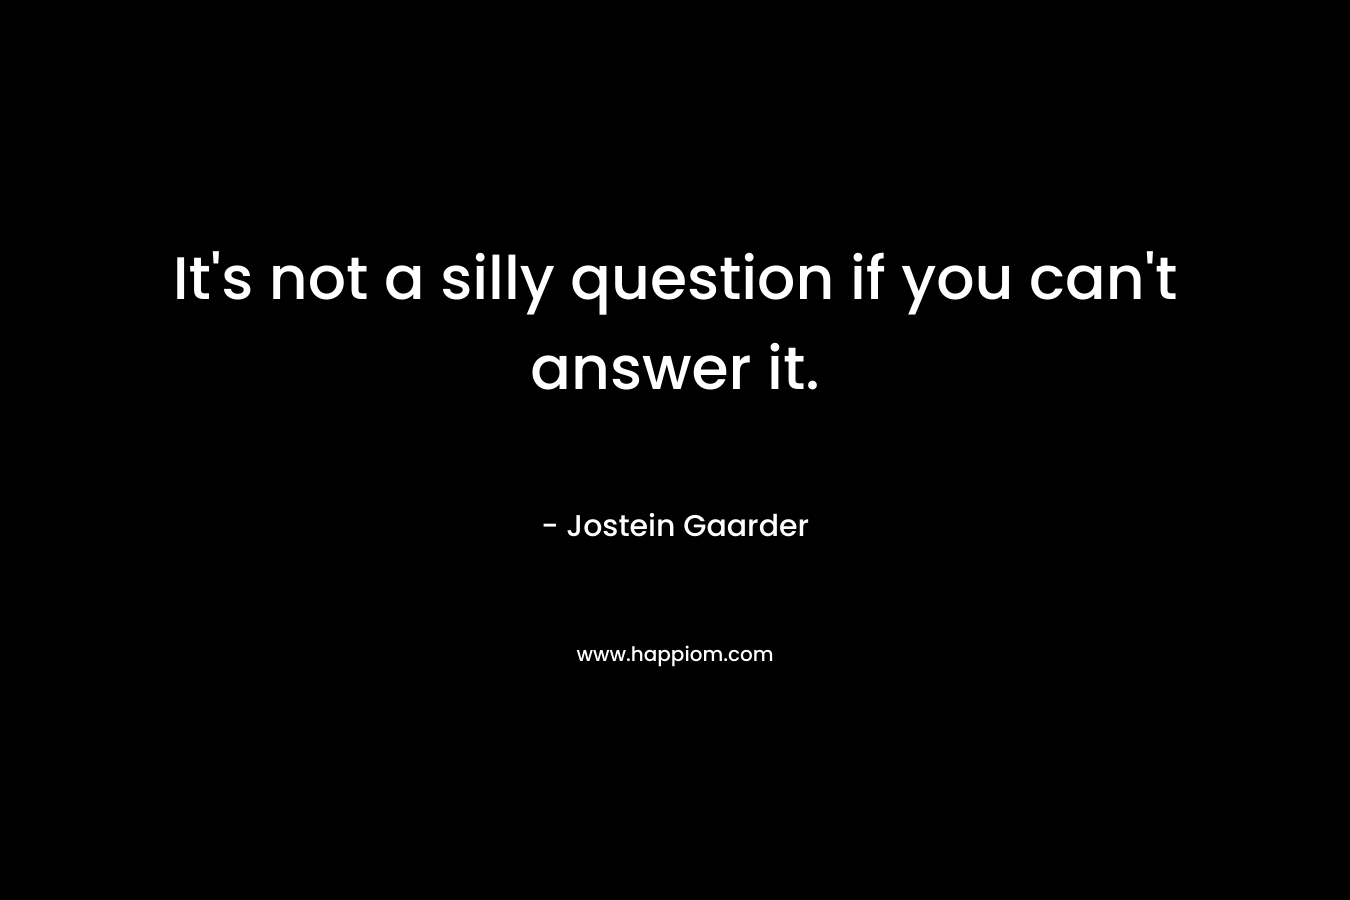 It’s not a silly question if you can’t answer it. – Jostein Gaarder